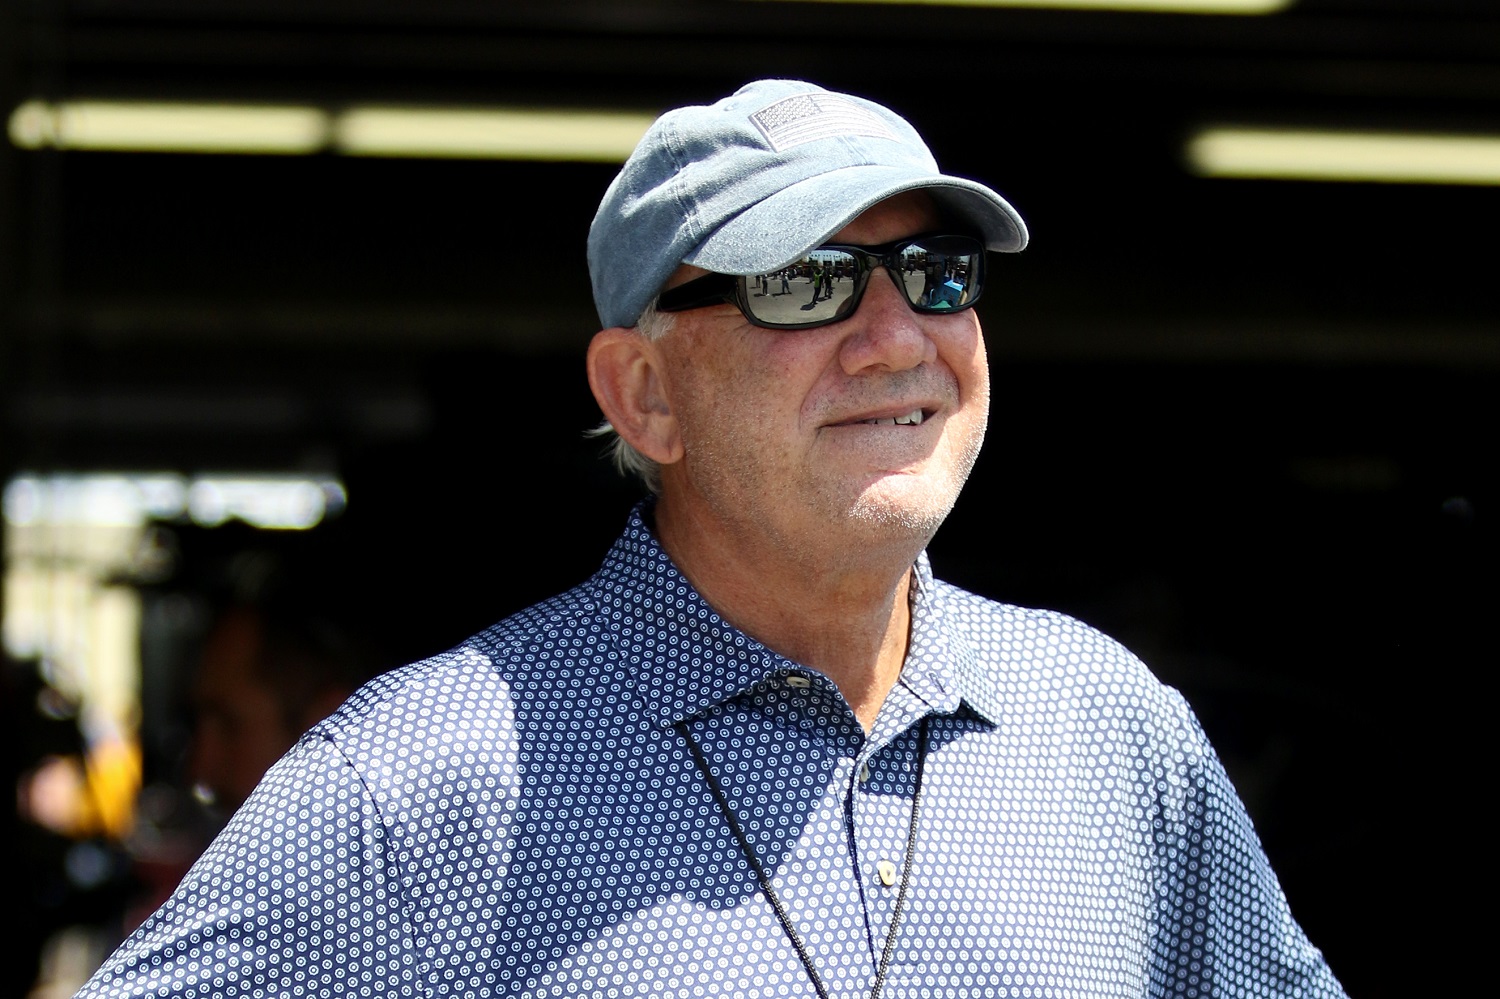 Dale Jarrett retired after 32 NASCAR Cup Series victories  and has been broadcasting races since.